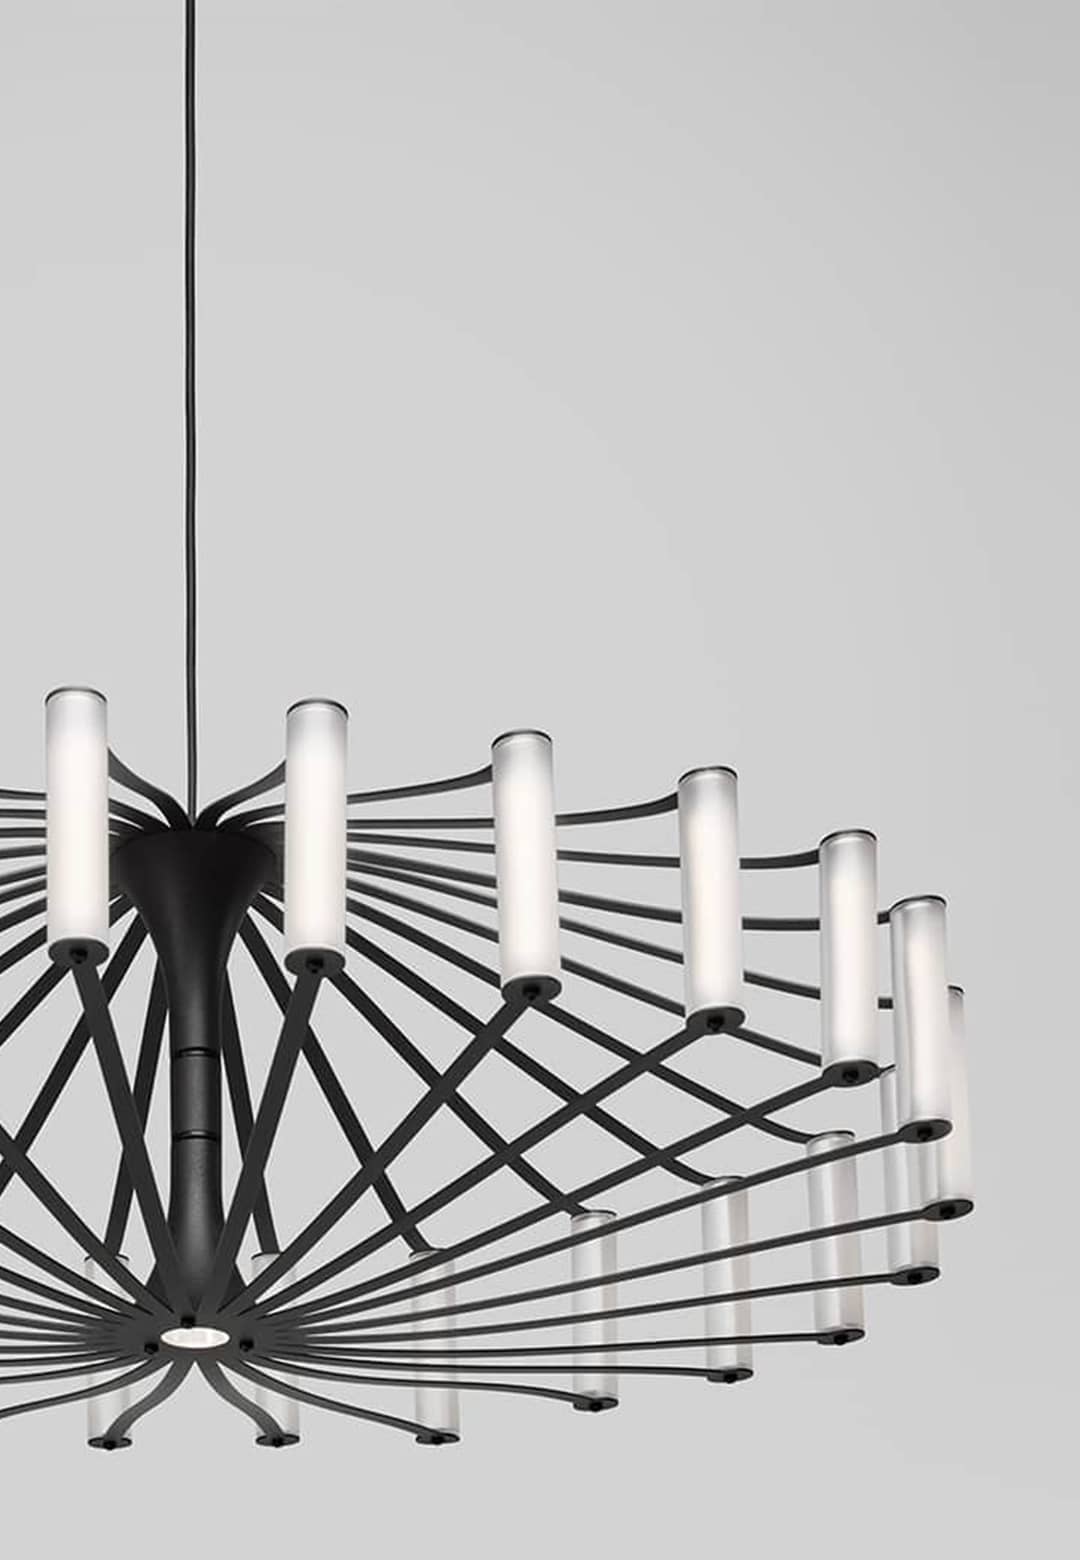 Richard Hutten designs a sustainable lamp The Wheel for Dutch urban design collective, JAPTH